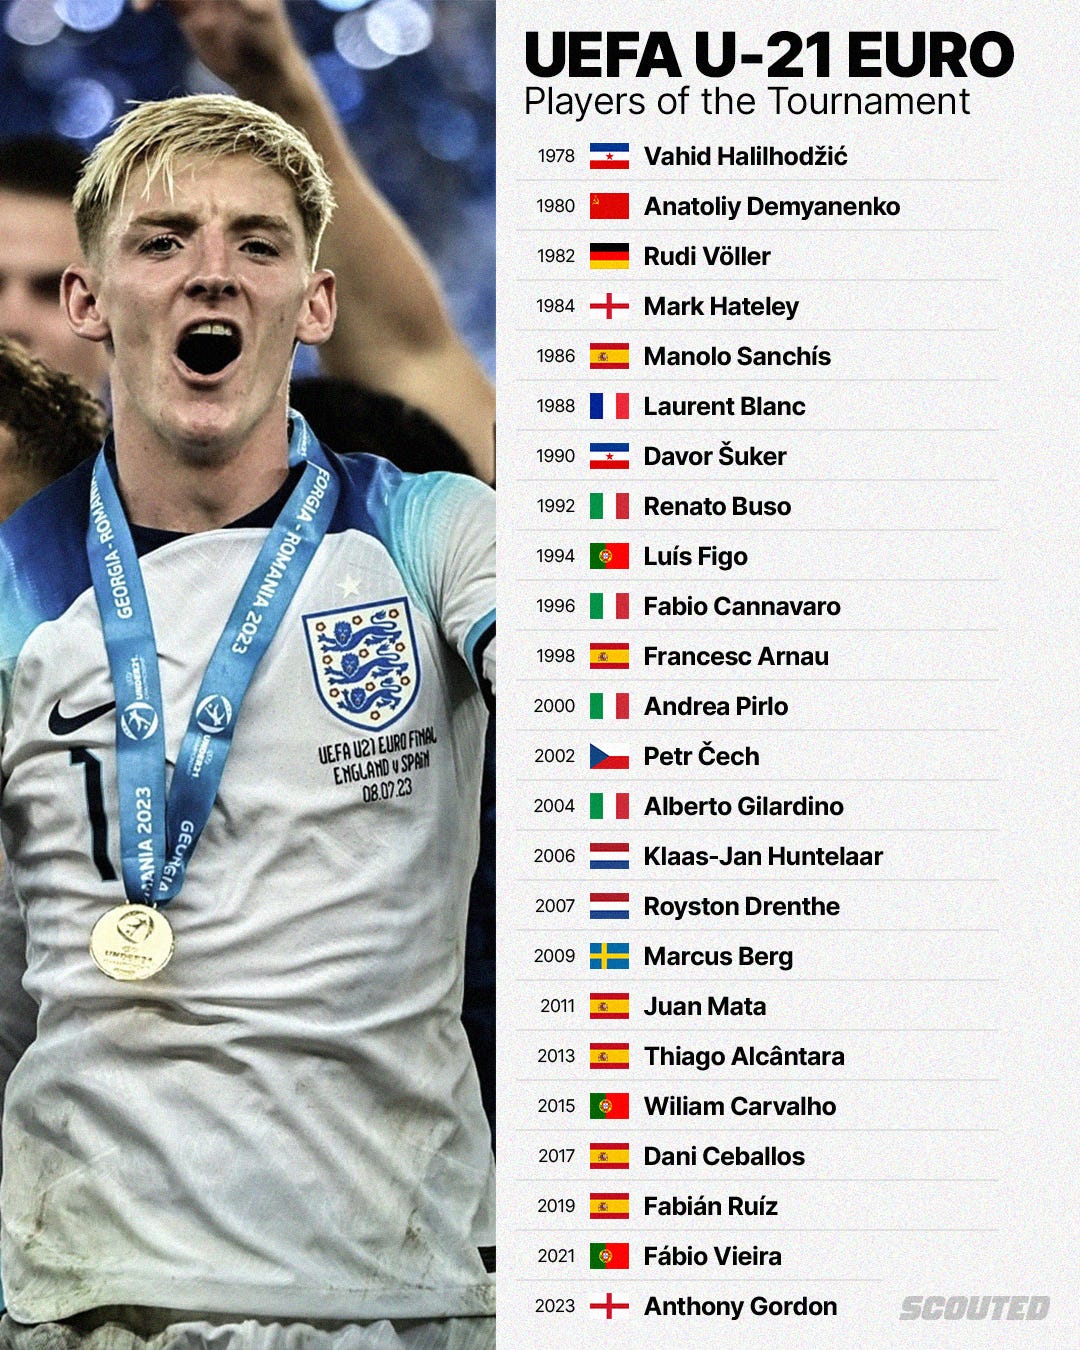 A photo of England's Anthony Gordon celebrating winning the 2023 UEFA U-21 EURO with a full list of players that have won the Player of the Tournament award since 1978.